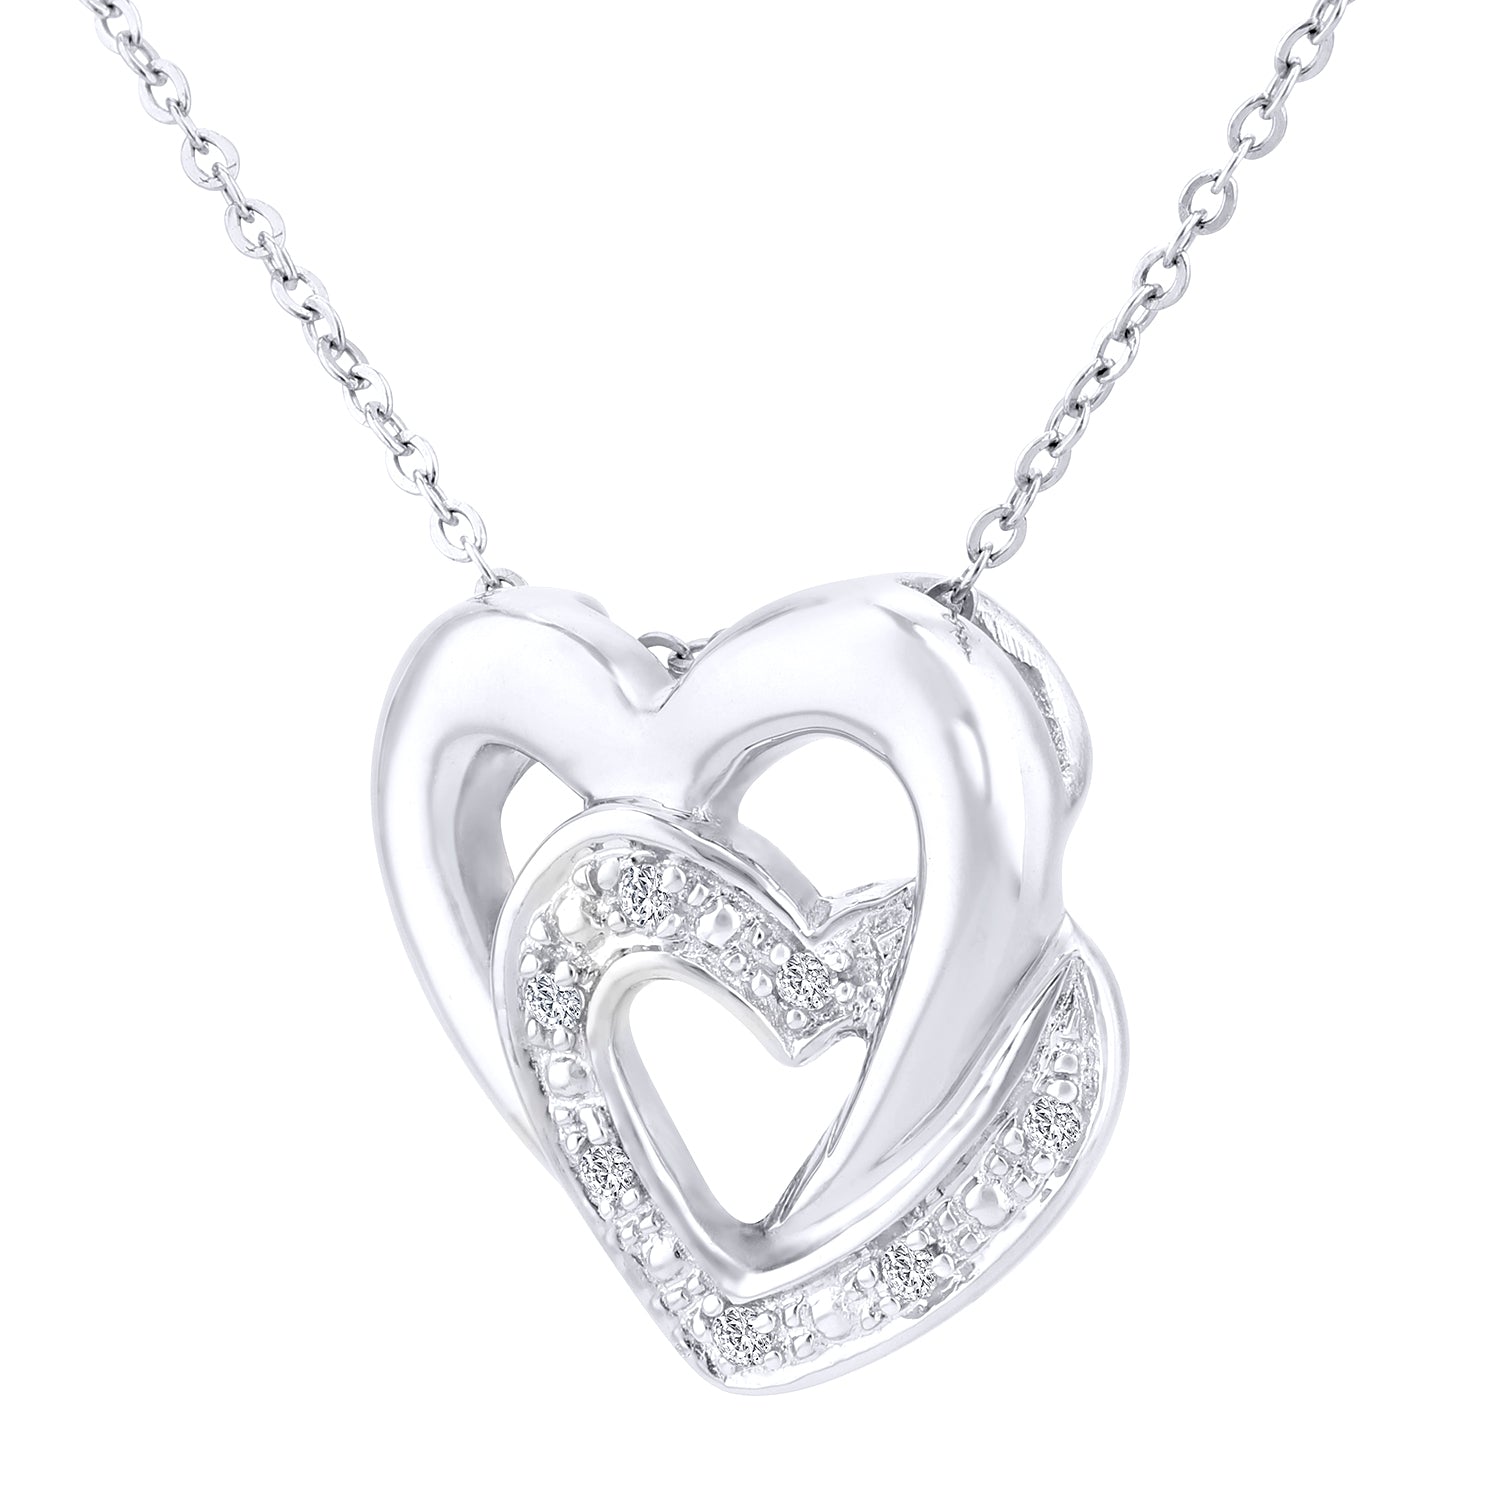 9ct White Gold  Round 3pts Diamond Heart Charm Necklace 18 inch - PP0AXL2435W